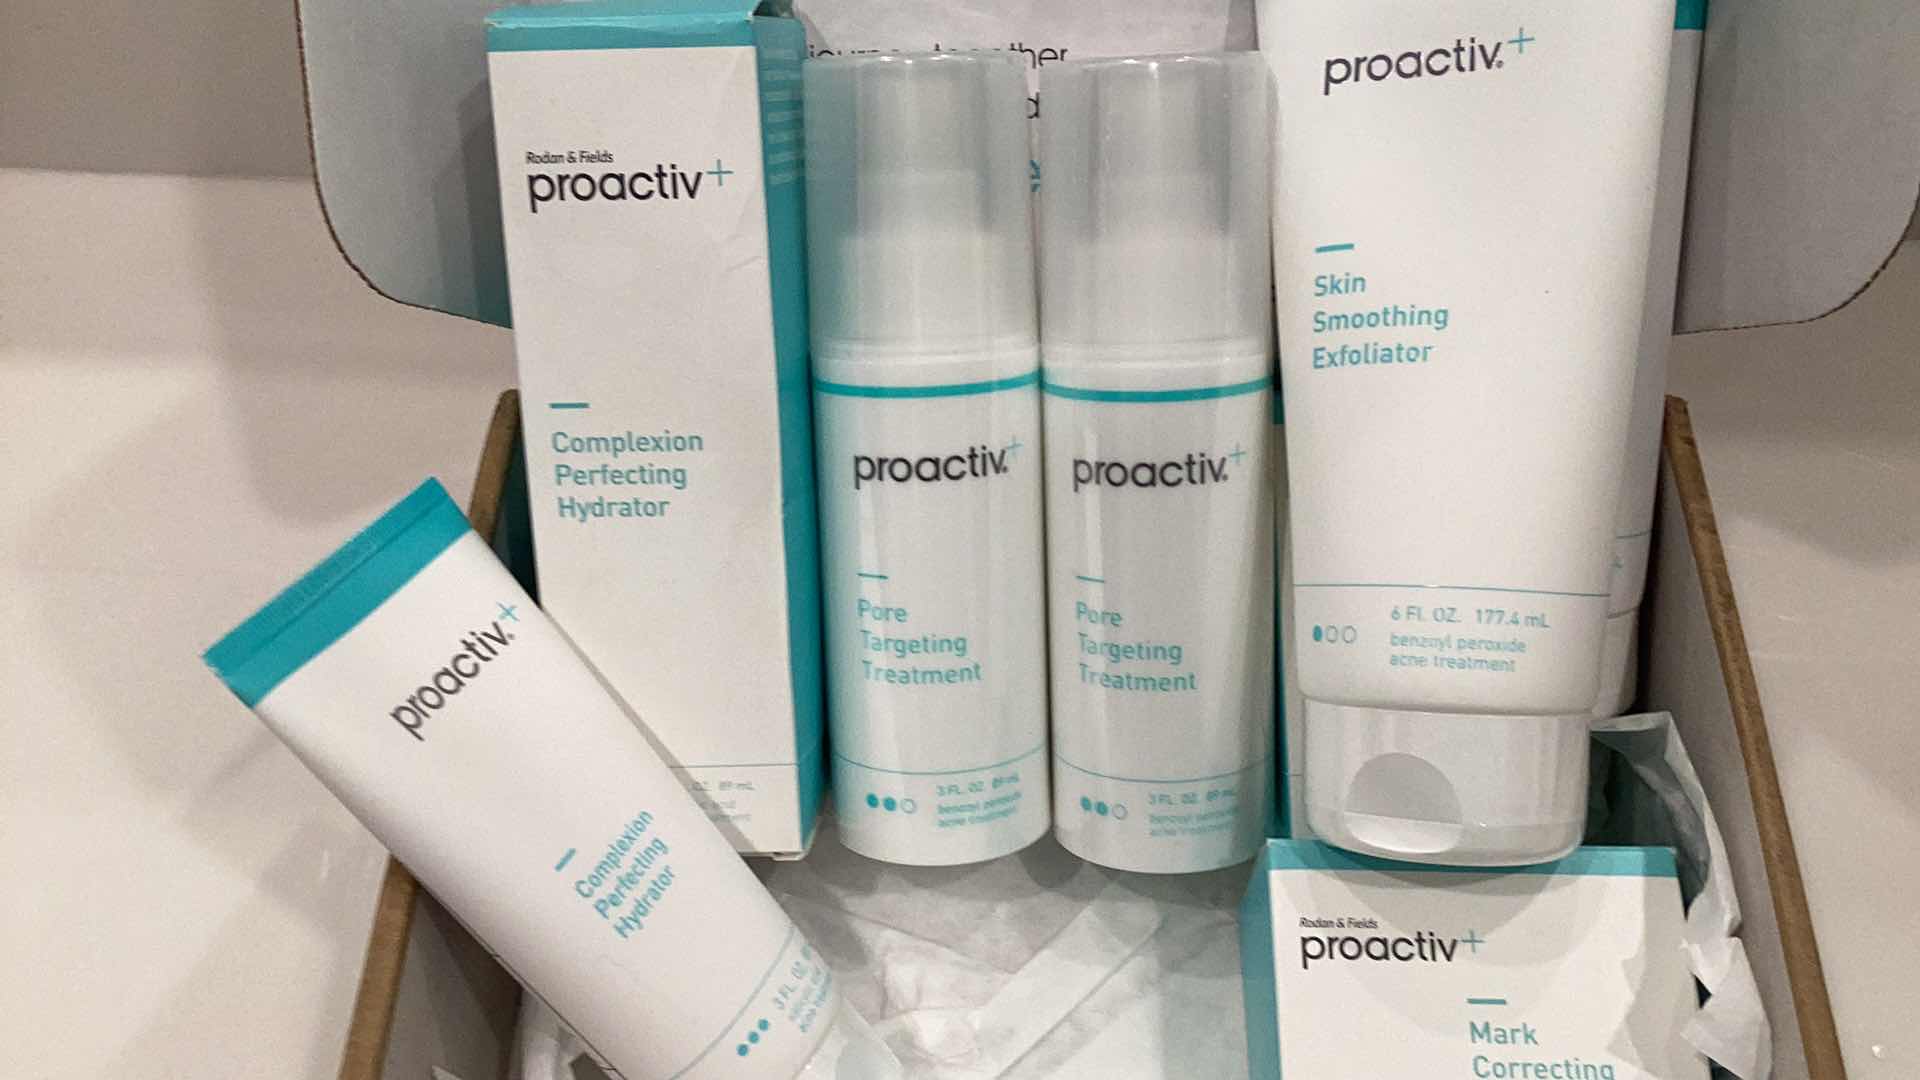 Photo 3 of PROACTIVE THIS PRODUCT IS EXPIRED BUT ITS SEALED FROM FACTORY IT INCLUDES COMPLEXION PERFECTING HYDRATOR, SKIN SMOOTHING EXFOLIATOR, MARK CORRECTING PADS, EYE BRIGHTENING SERUM, AND OTHER SKIN ESSENTIALS FOR EVERYDAY ROUTINE.